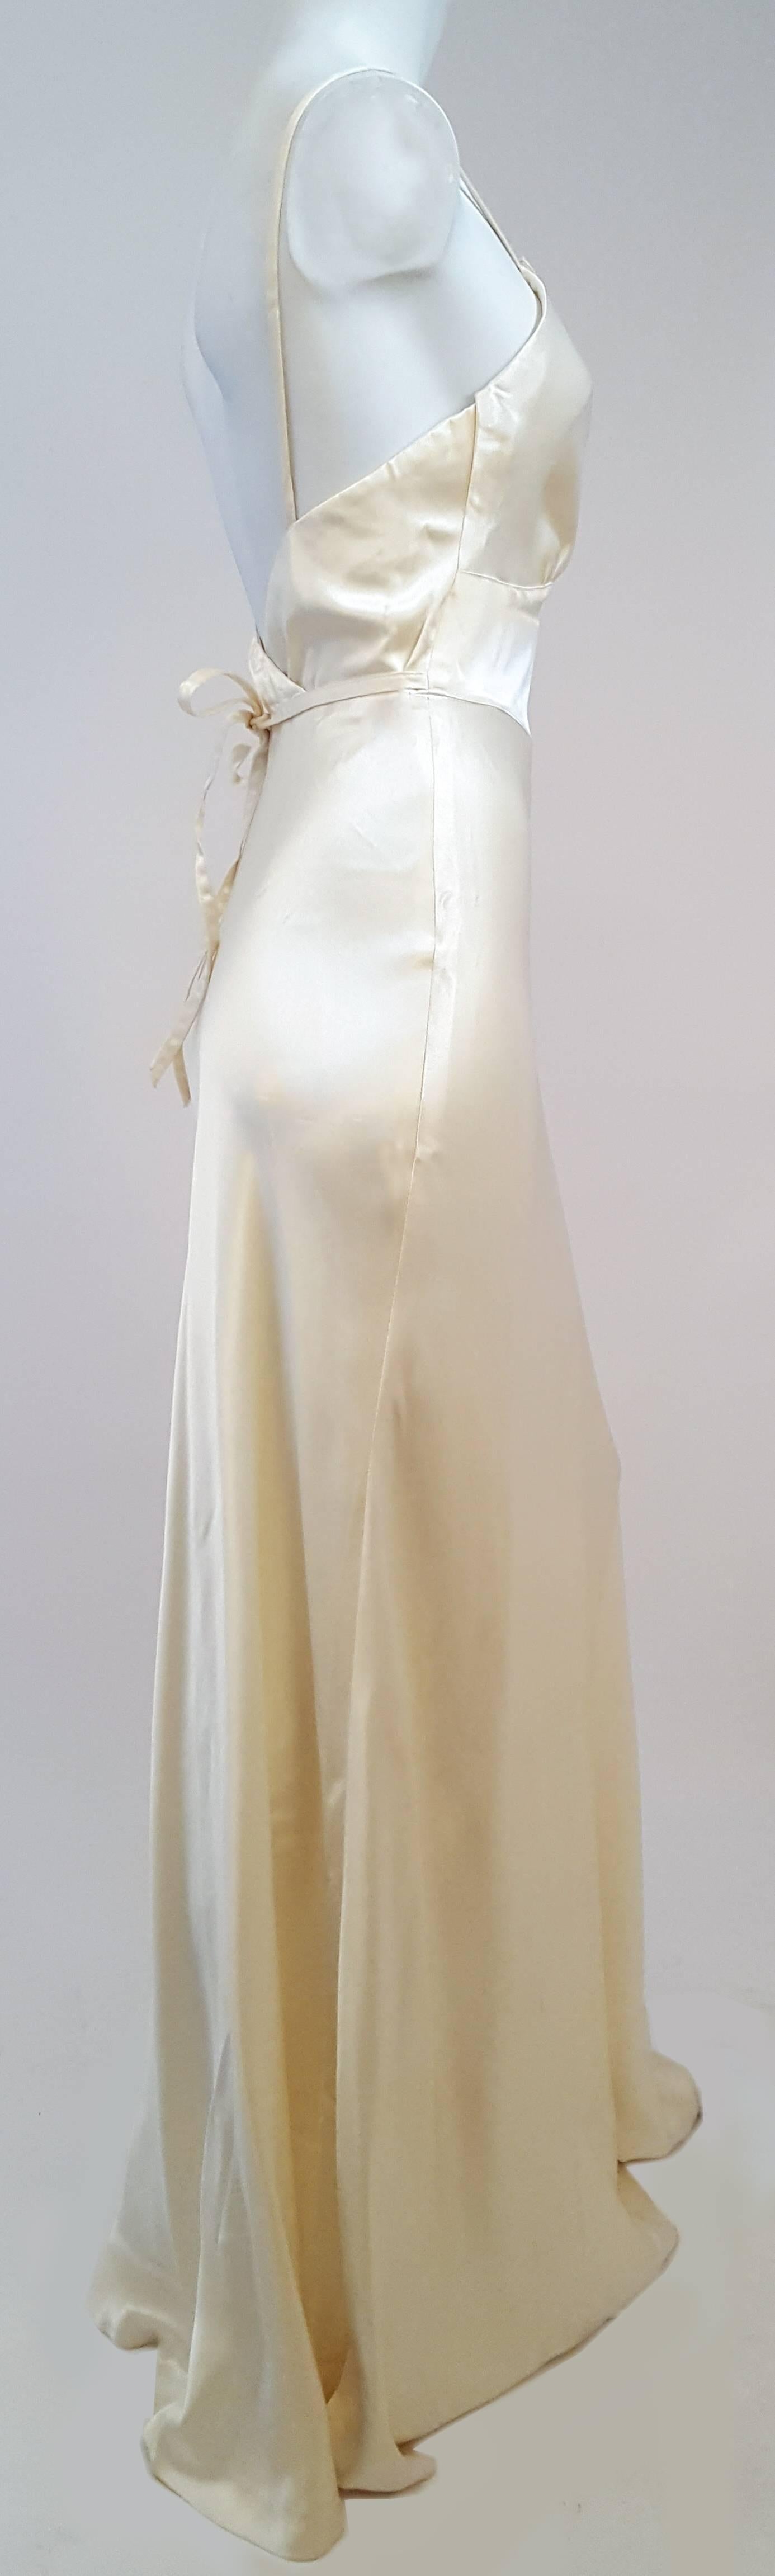 1970s Linda Carter for Young Edwardian 30s Style Ivory Dress. Linda Carter from the 1970s Wonder Woman television show for iconic 1970s brand Young Edwardian ivory gown with lace front panel. Size zip closure, waist ties in back. Deadstock with tags.